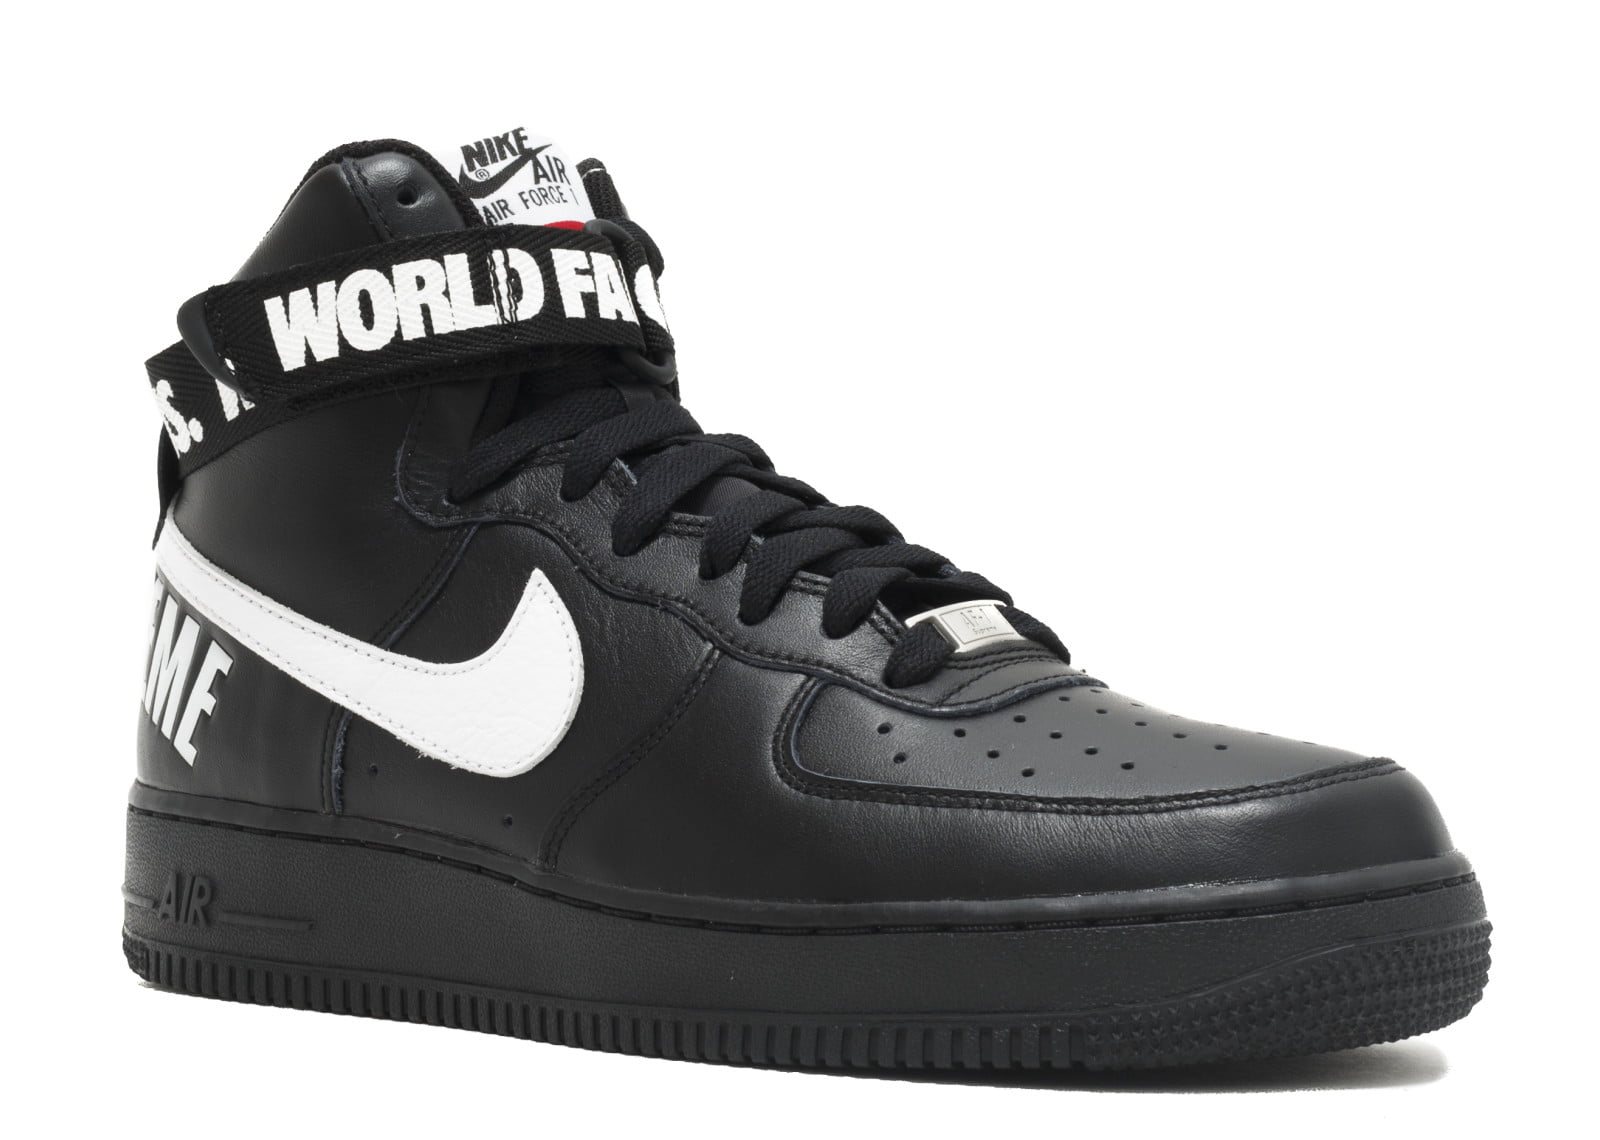 black air force 1 size 12